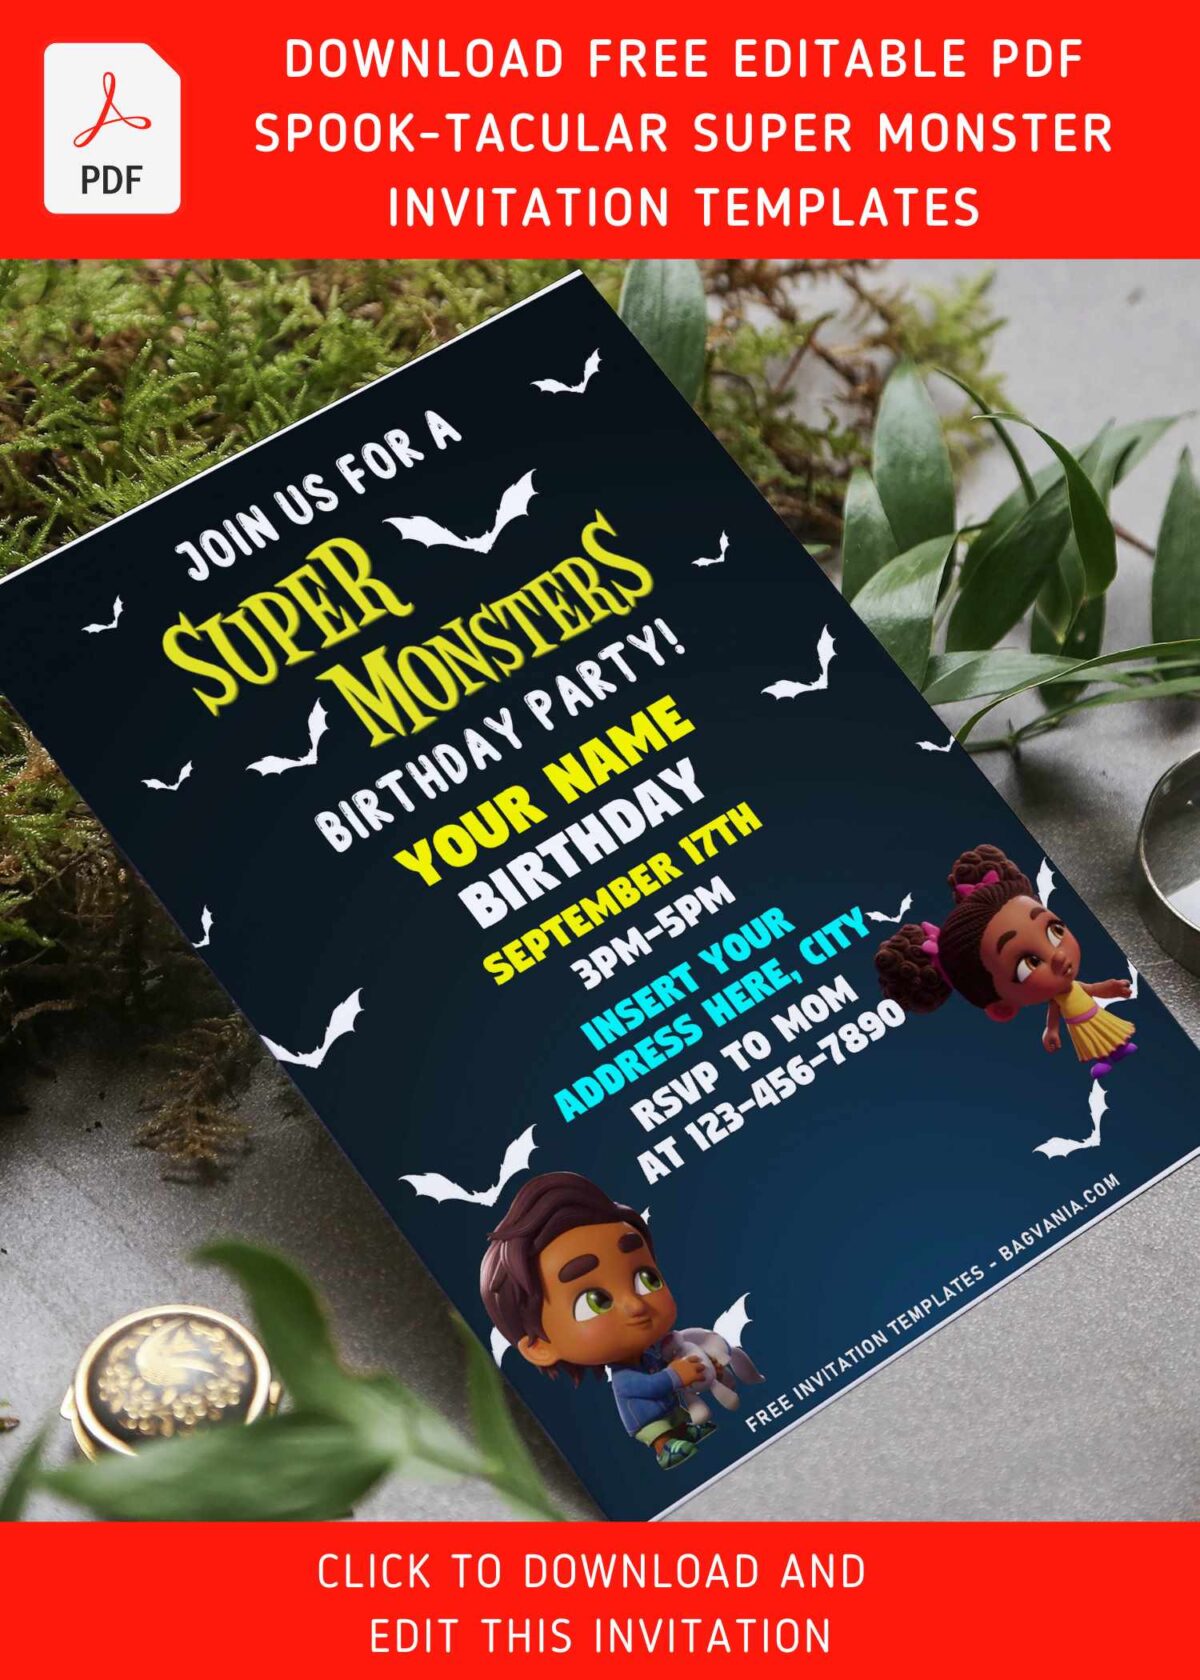 (Free Editable PDF) Spooktacular Super Monster Birthday Invitation Templates with adorable Rocky Wolf